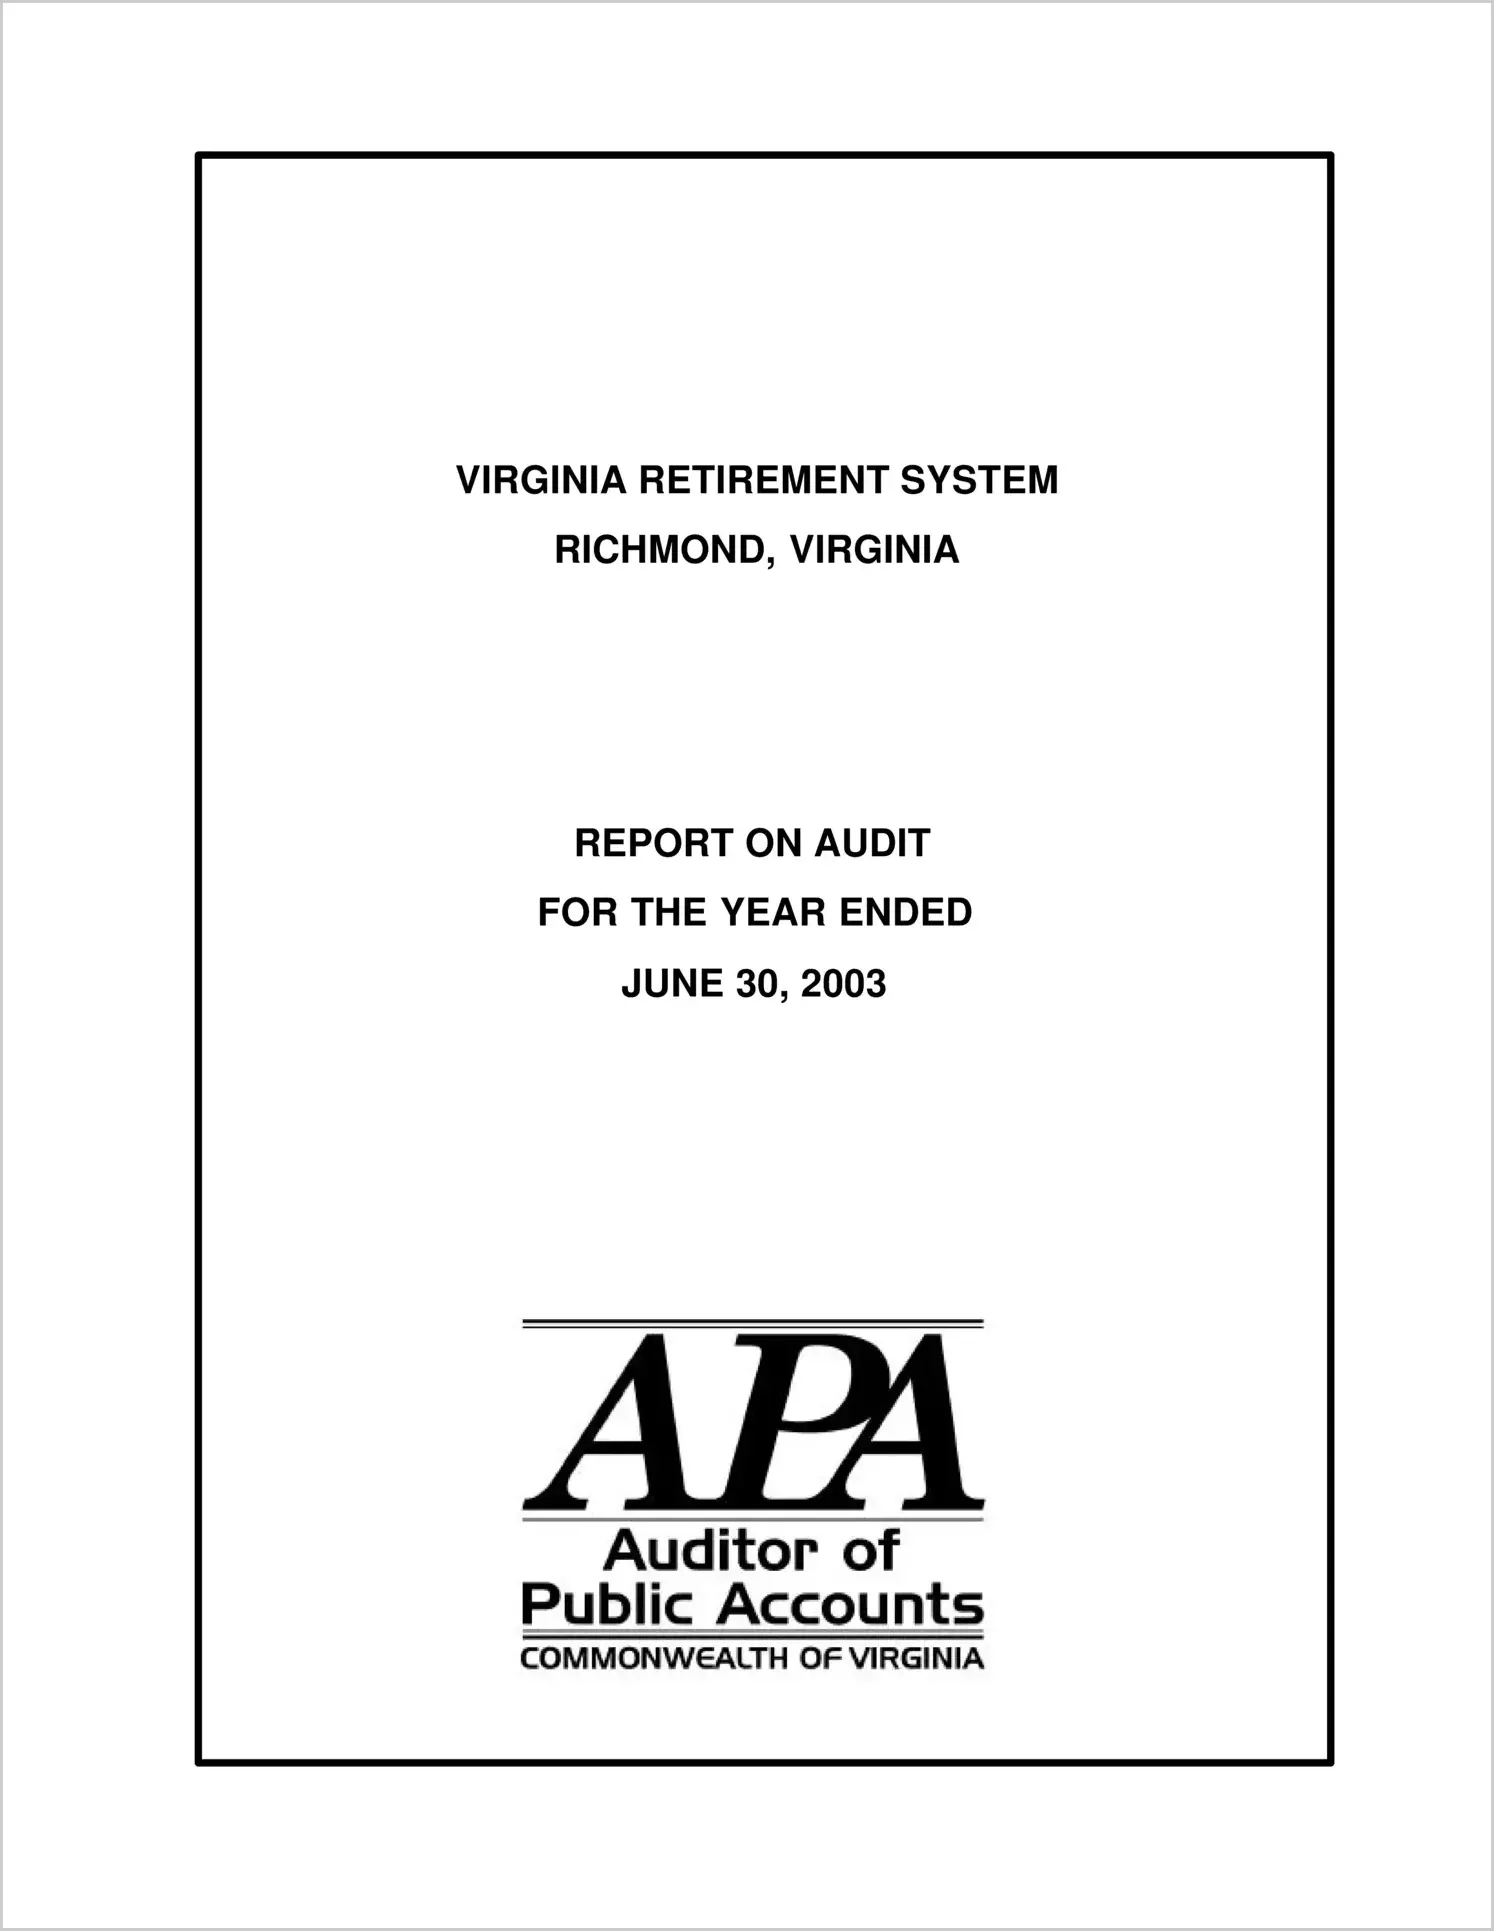 Virginia Retirement System for the year ended June 30, 2003